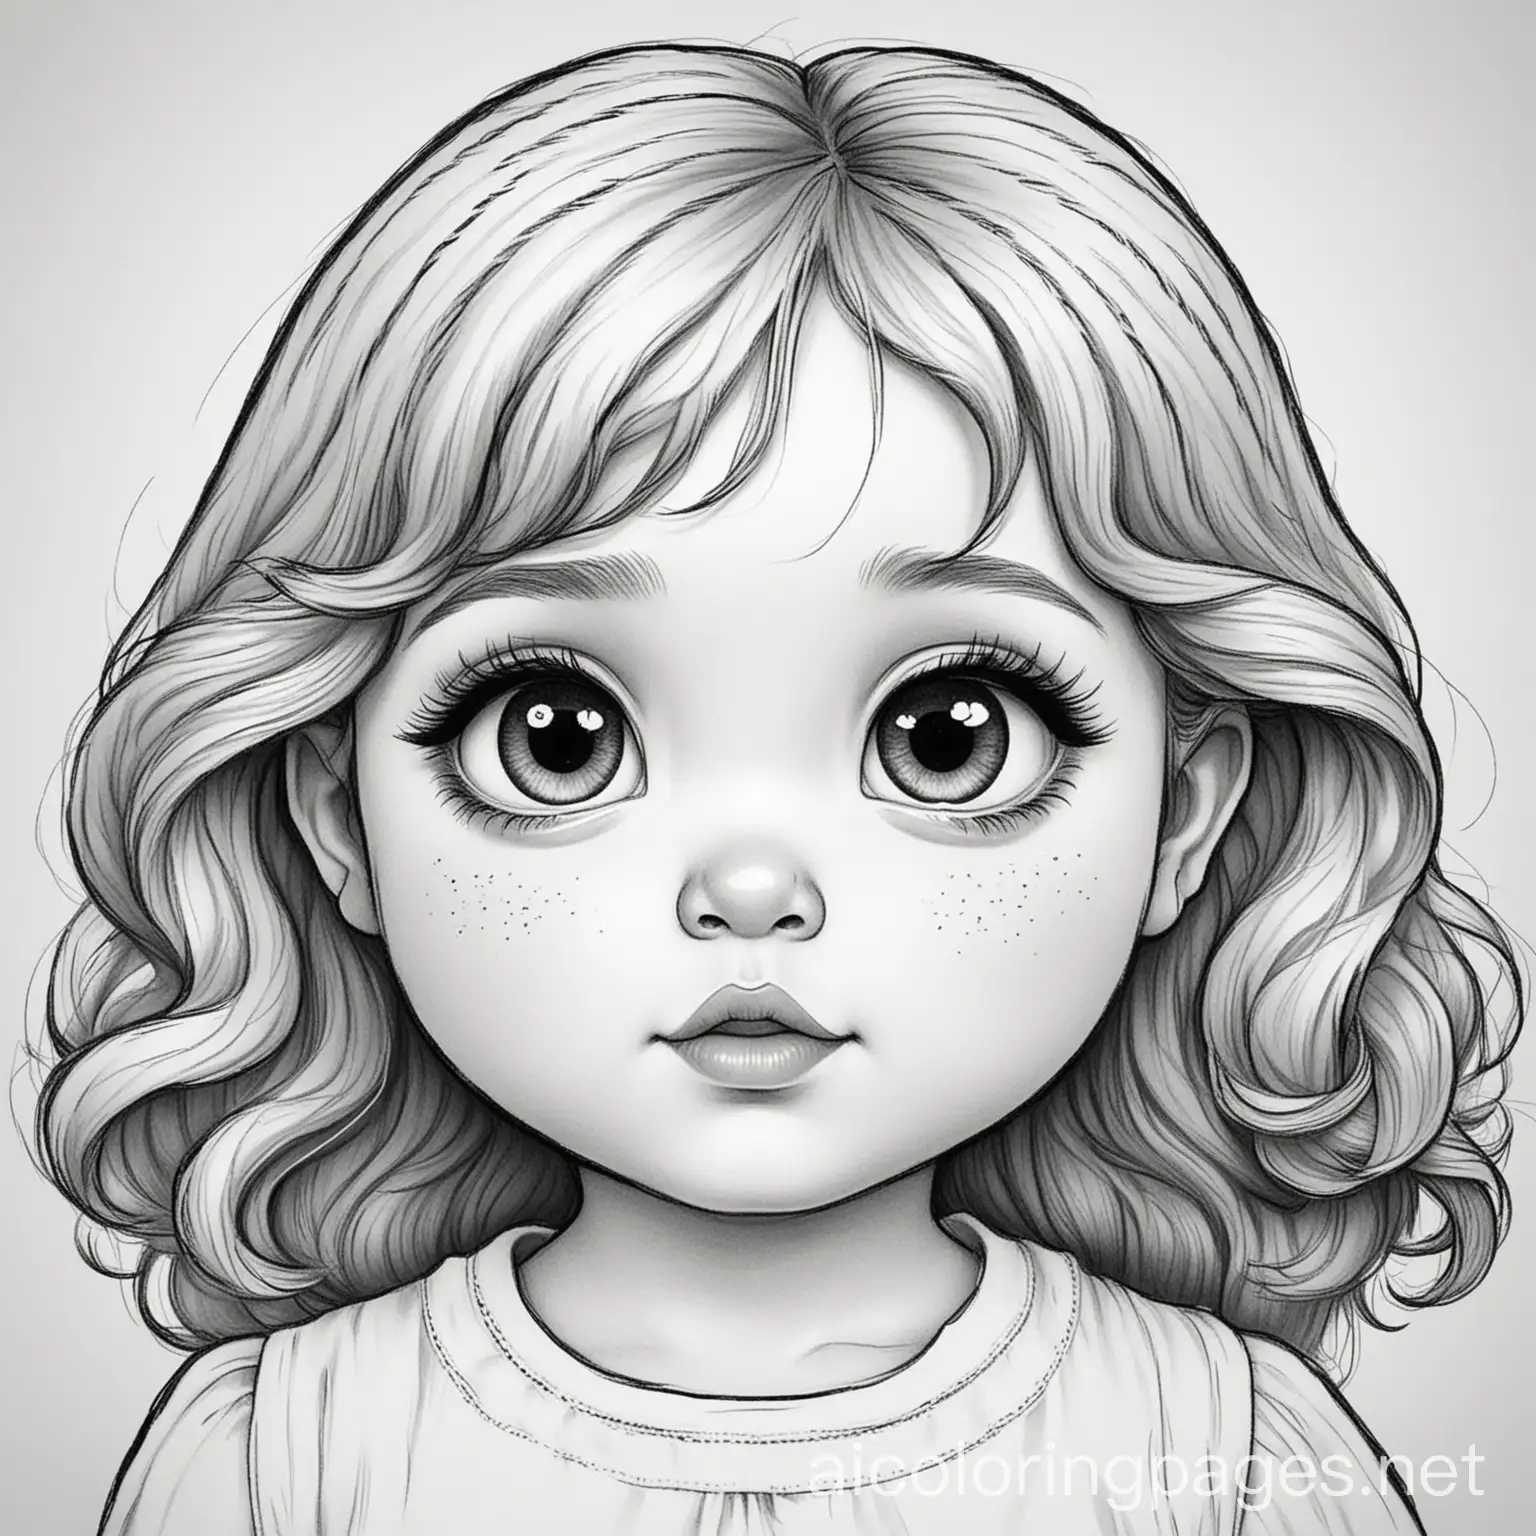 Adorable-Baby-Girl-Coloring-Page-with-Wavy-Hair-and-Big-Eyes